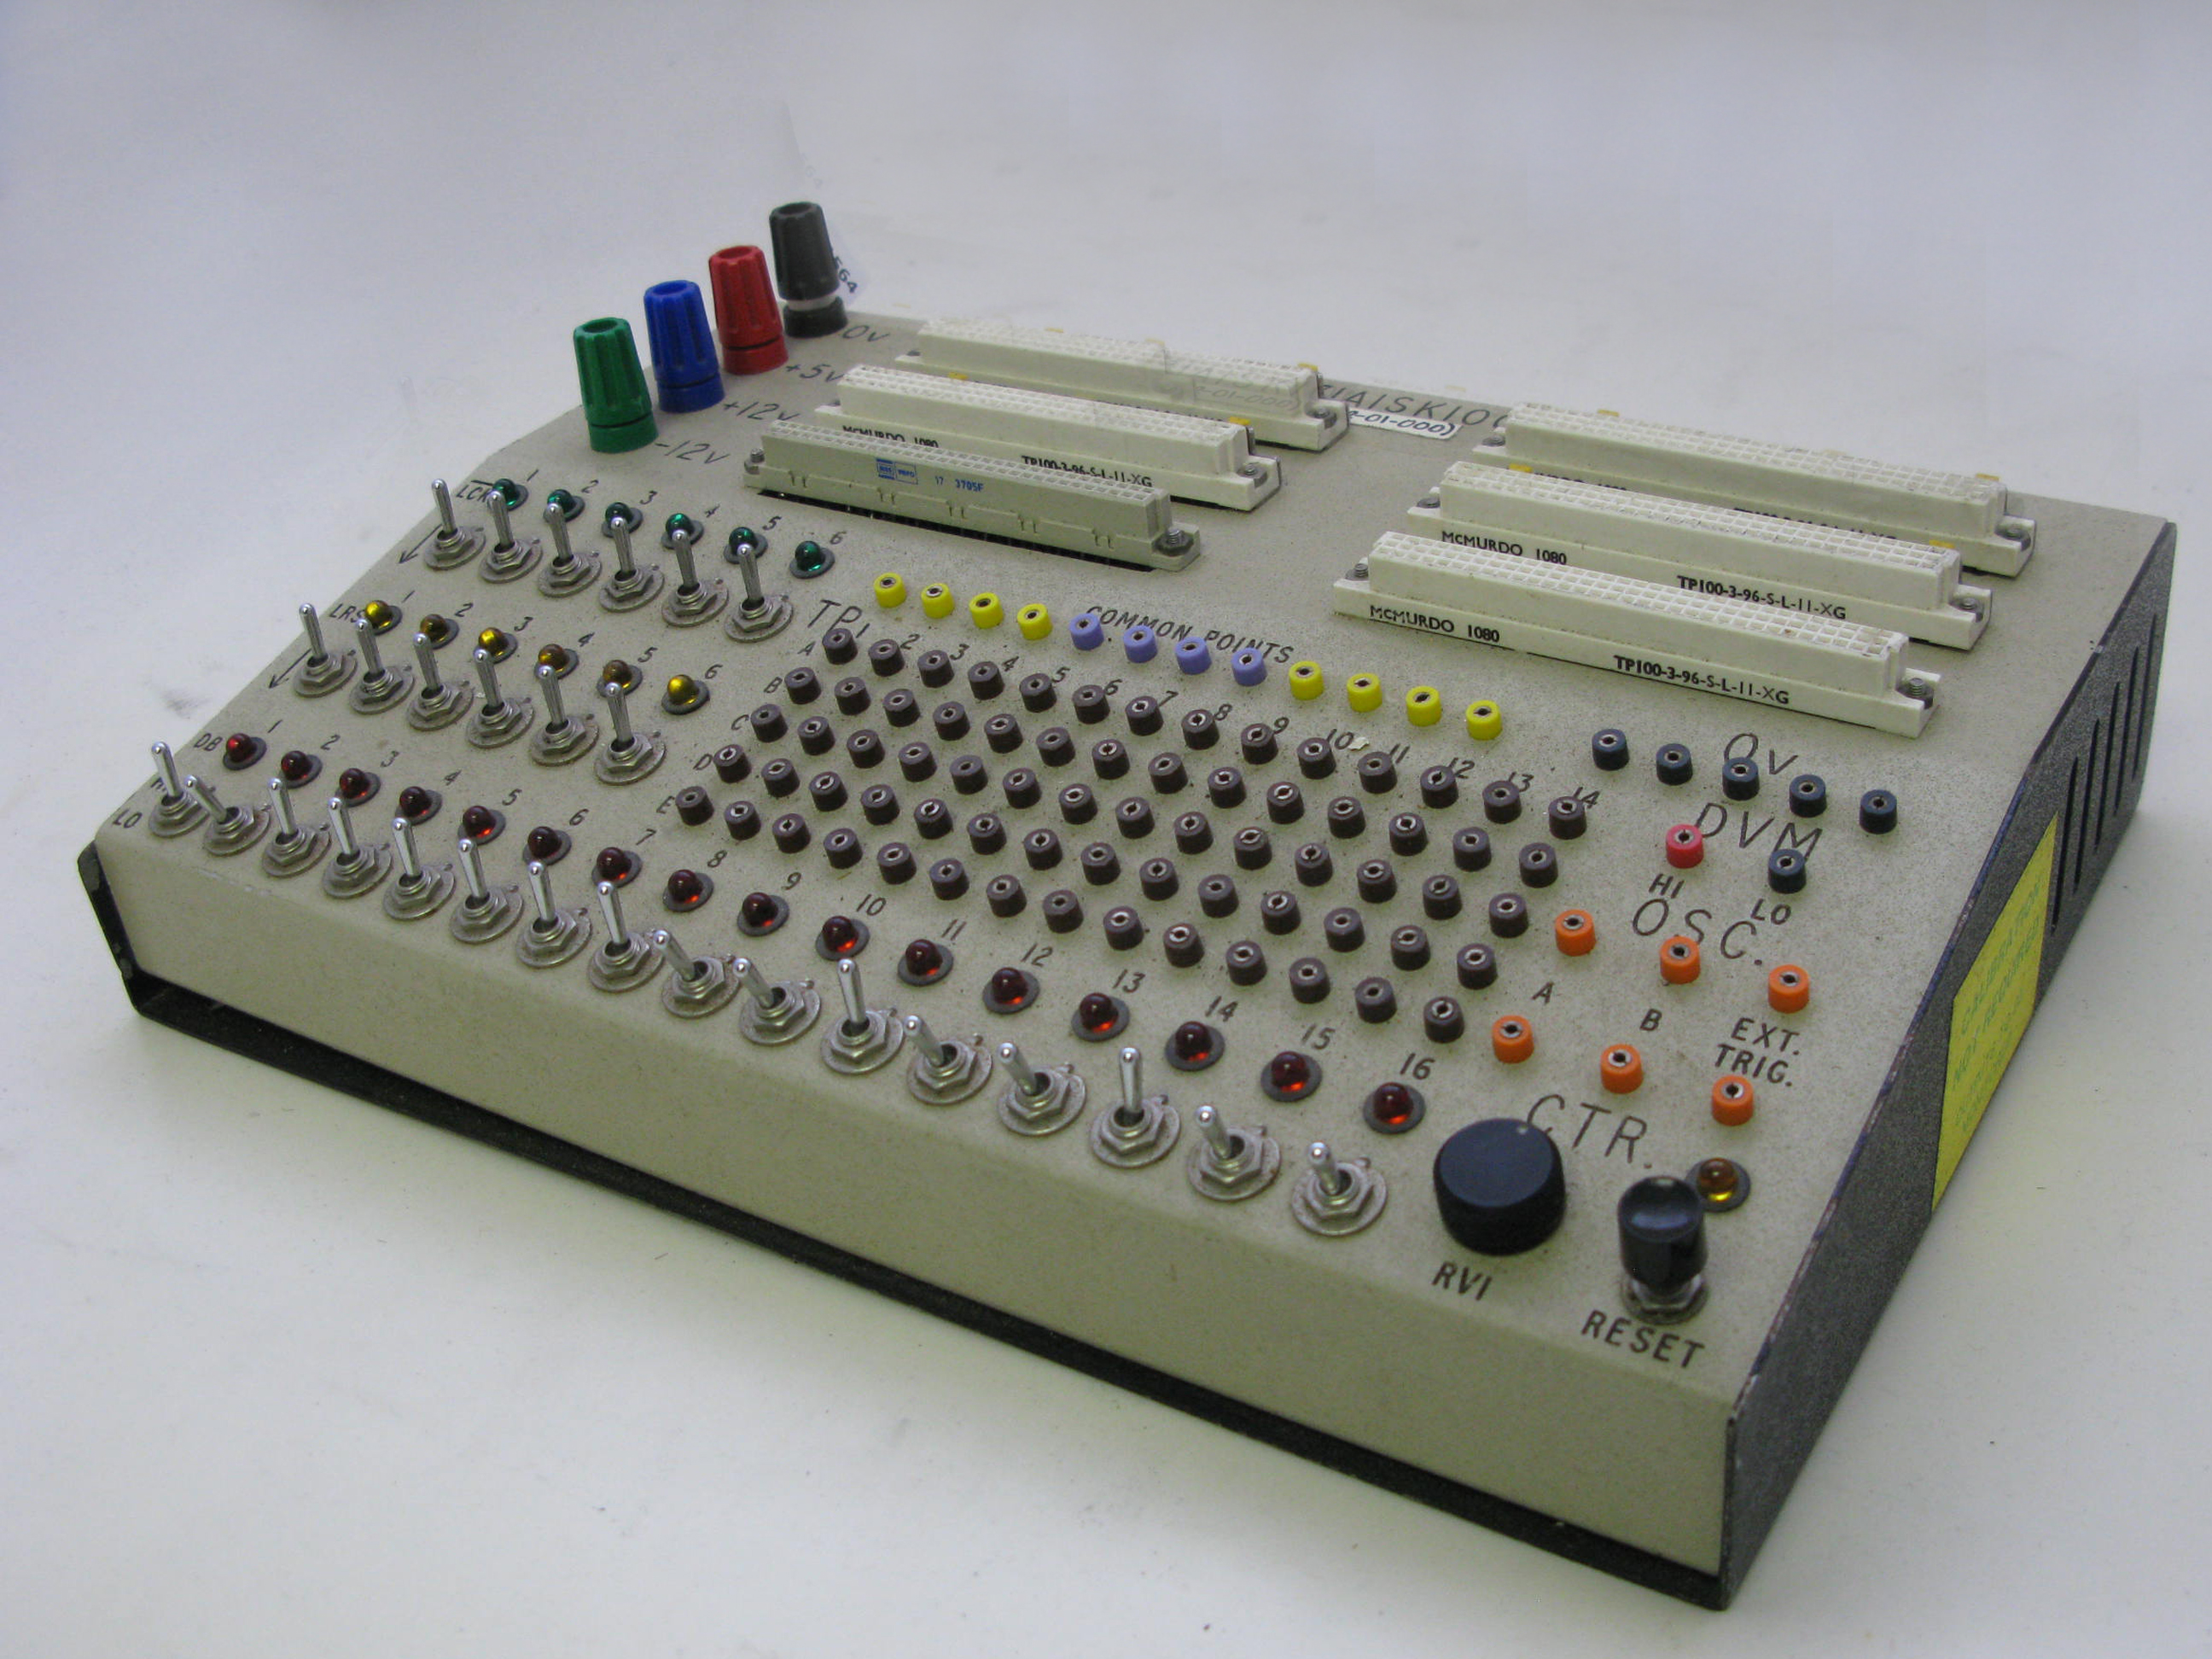 Special-to-Type Test Equipment (STTE) 71A1SK10022